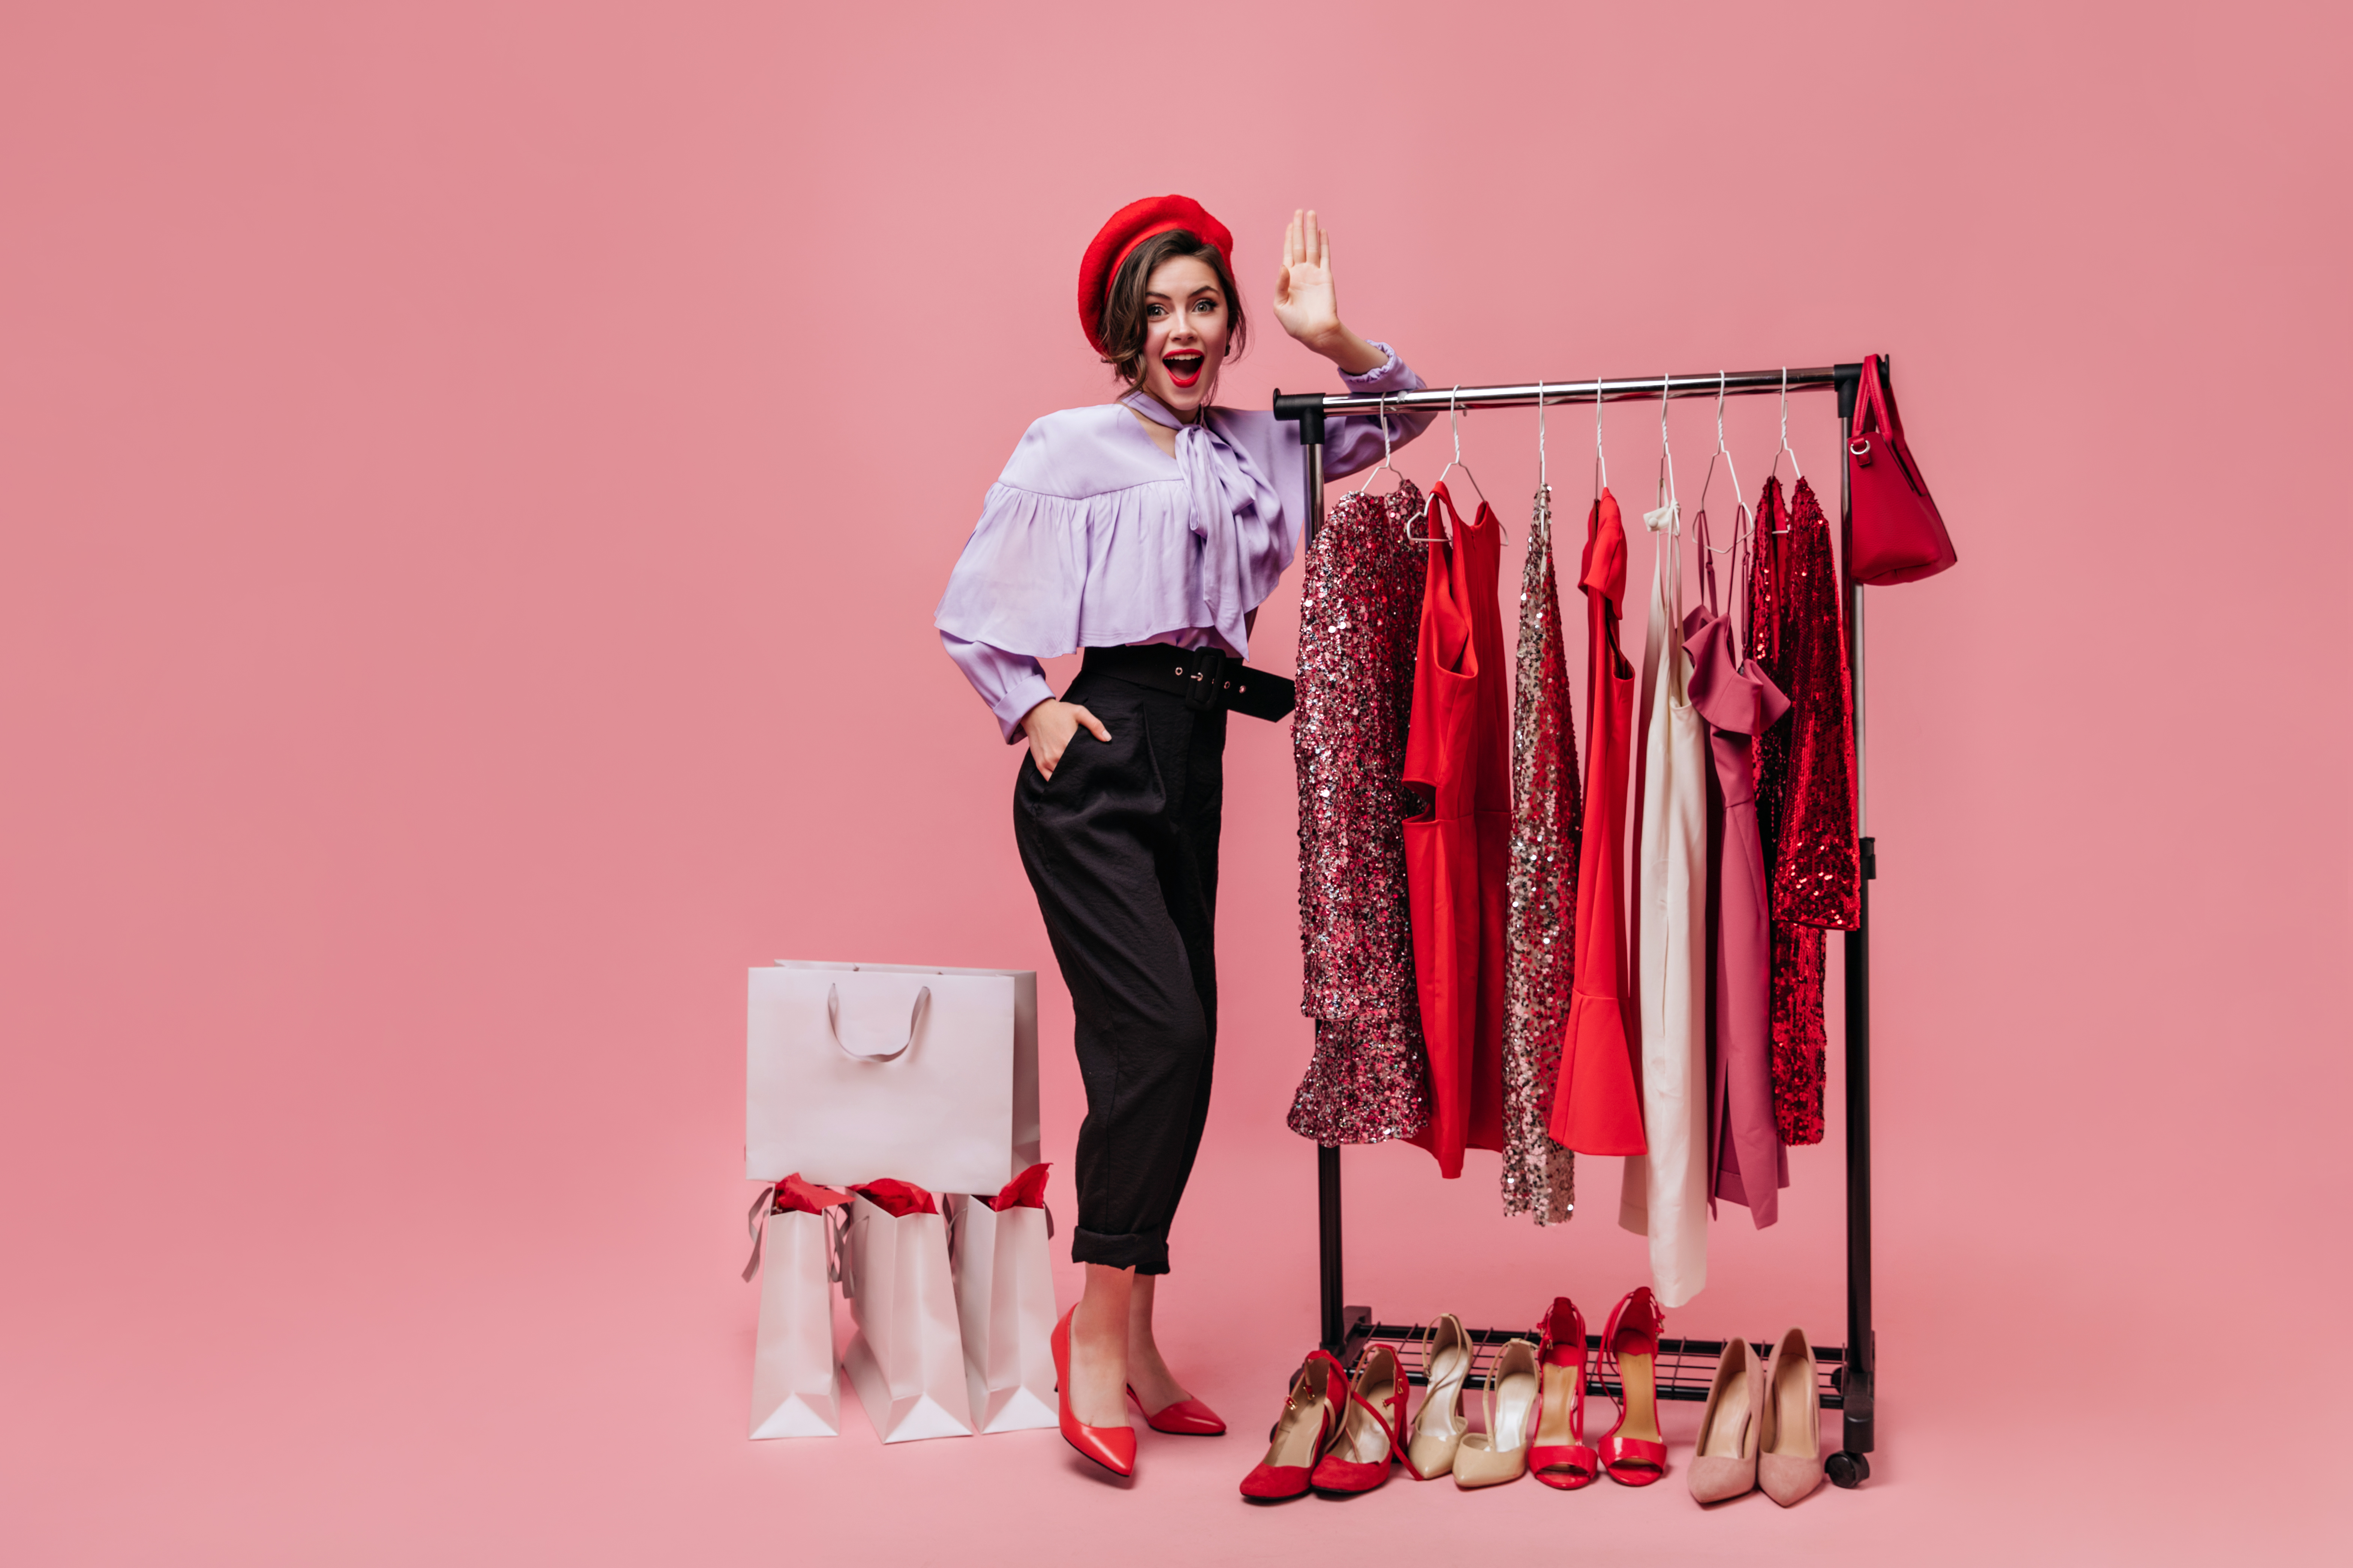 lady-poses-dressing-room-with-bright-clothes-shoes-girl-beret-lilac-blouse-looking-camera-pink-background.jpg